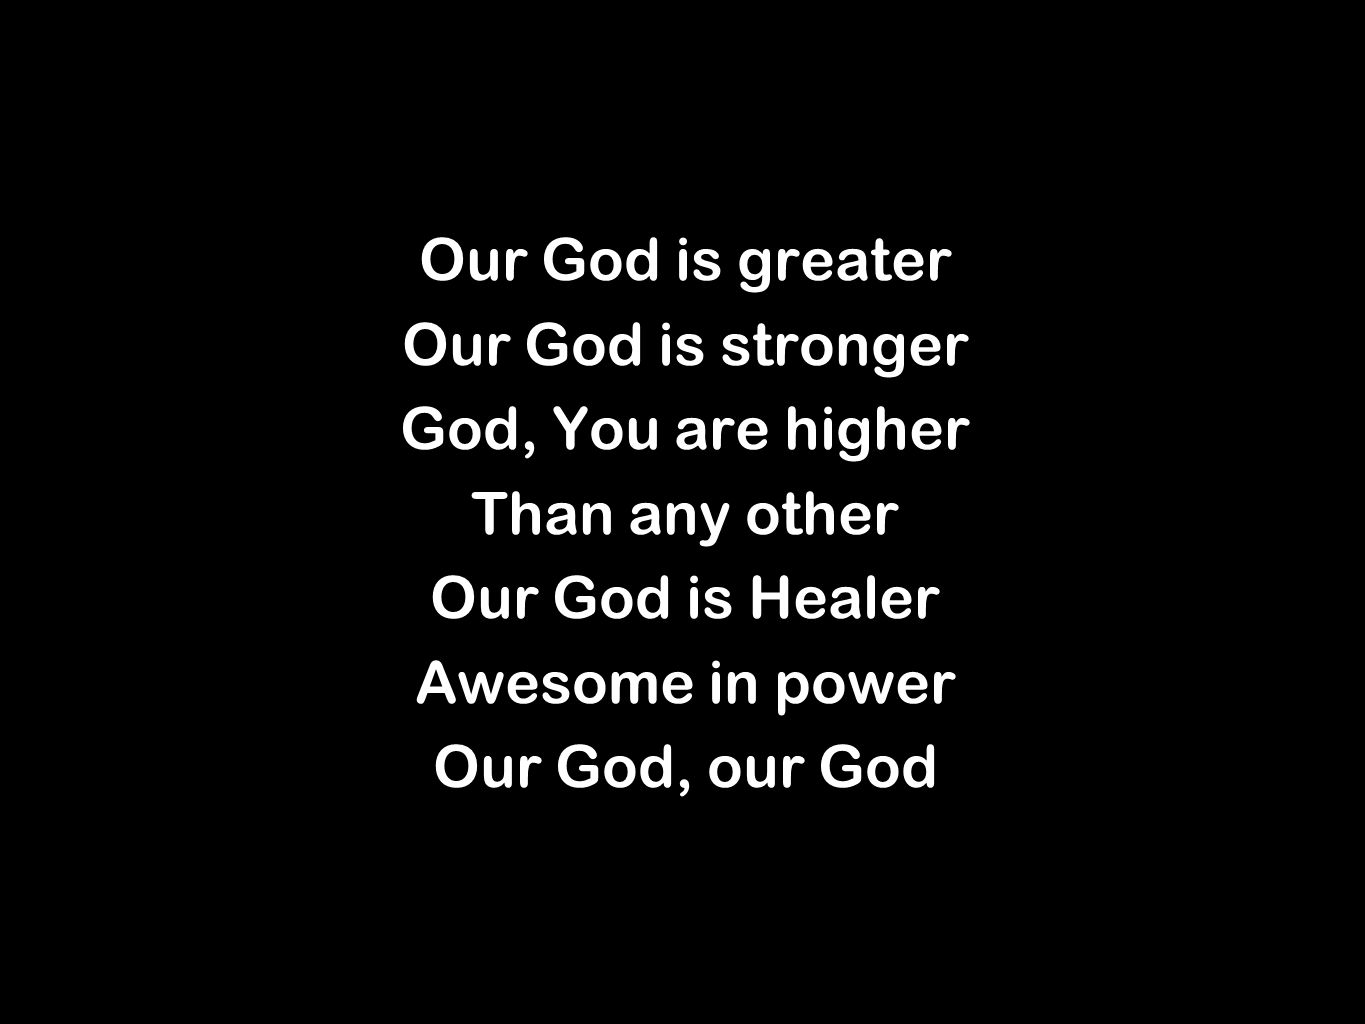 Our God is greater Our God is stronger God, You are higher Than any other Our God is Healer Awesome in power Our God, our God Our God is greater Our God is stronger God, You are higher Than any other Our God is Healer Awesome in power Our God, our God